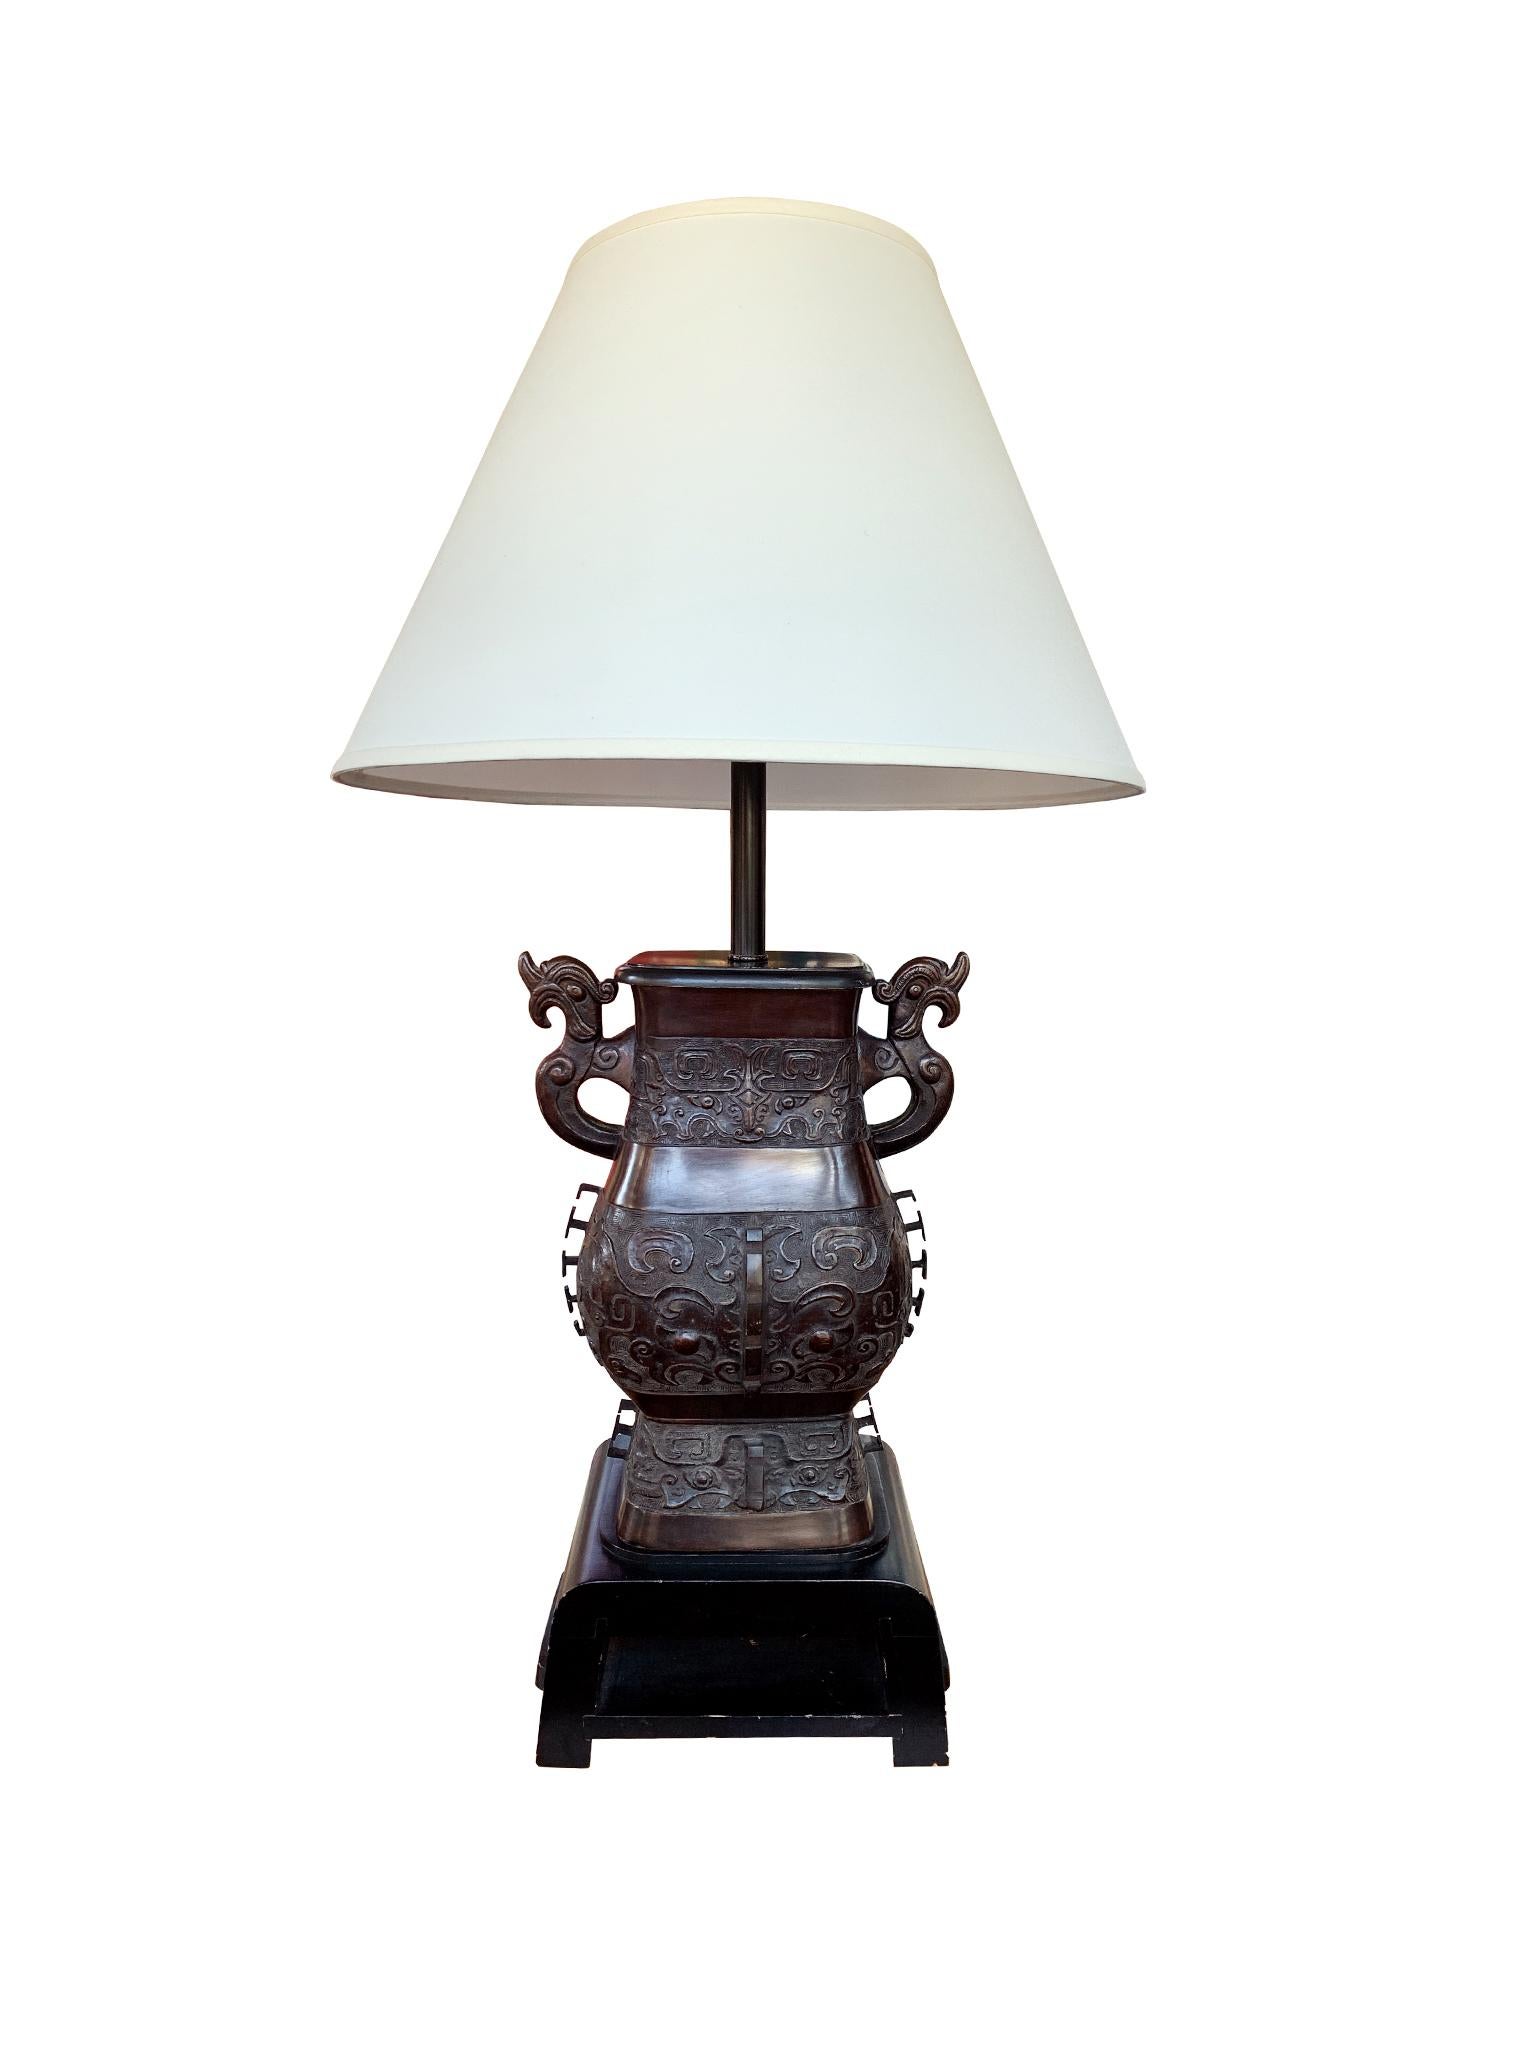 This James Mont table lamp is comprised of a cast bronze body with wood base and top. It was made in the Mid-20th Century. Like Mont's other eccentric designs, the lamp brings together his various stylistic influences. Floral and geometric motifs